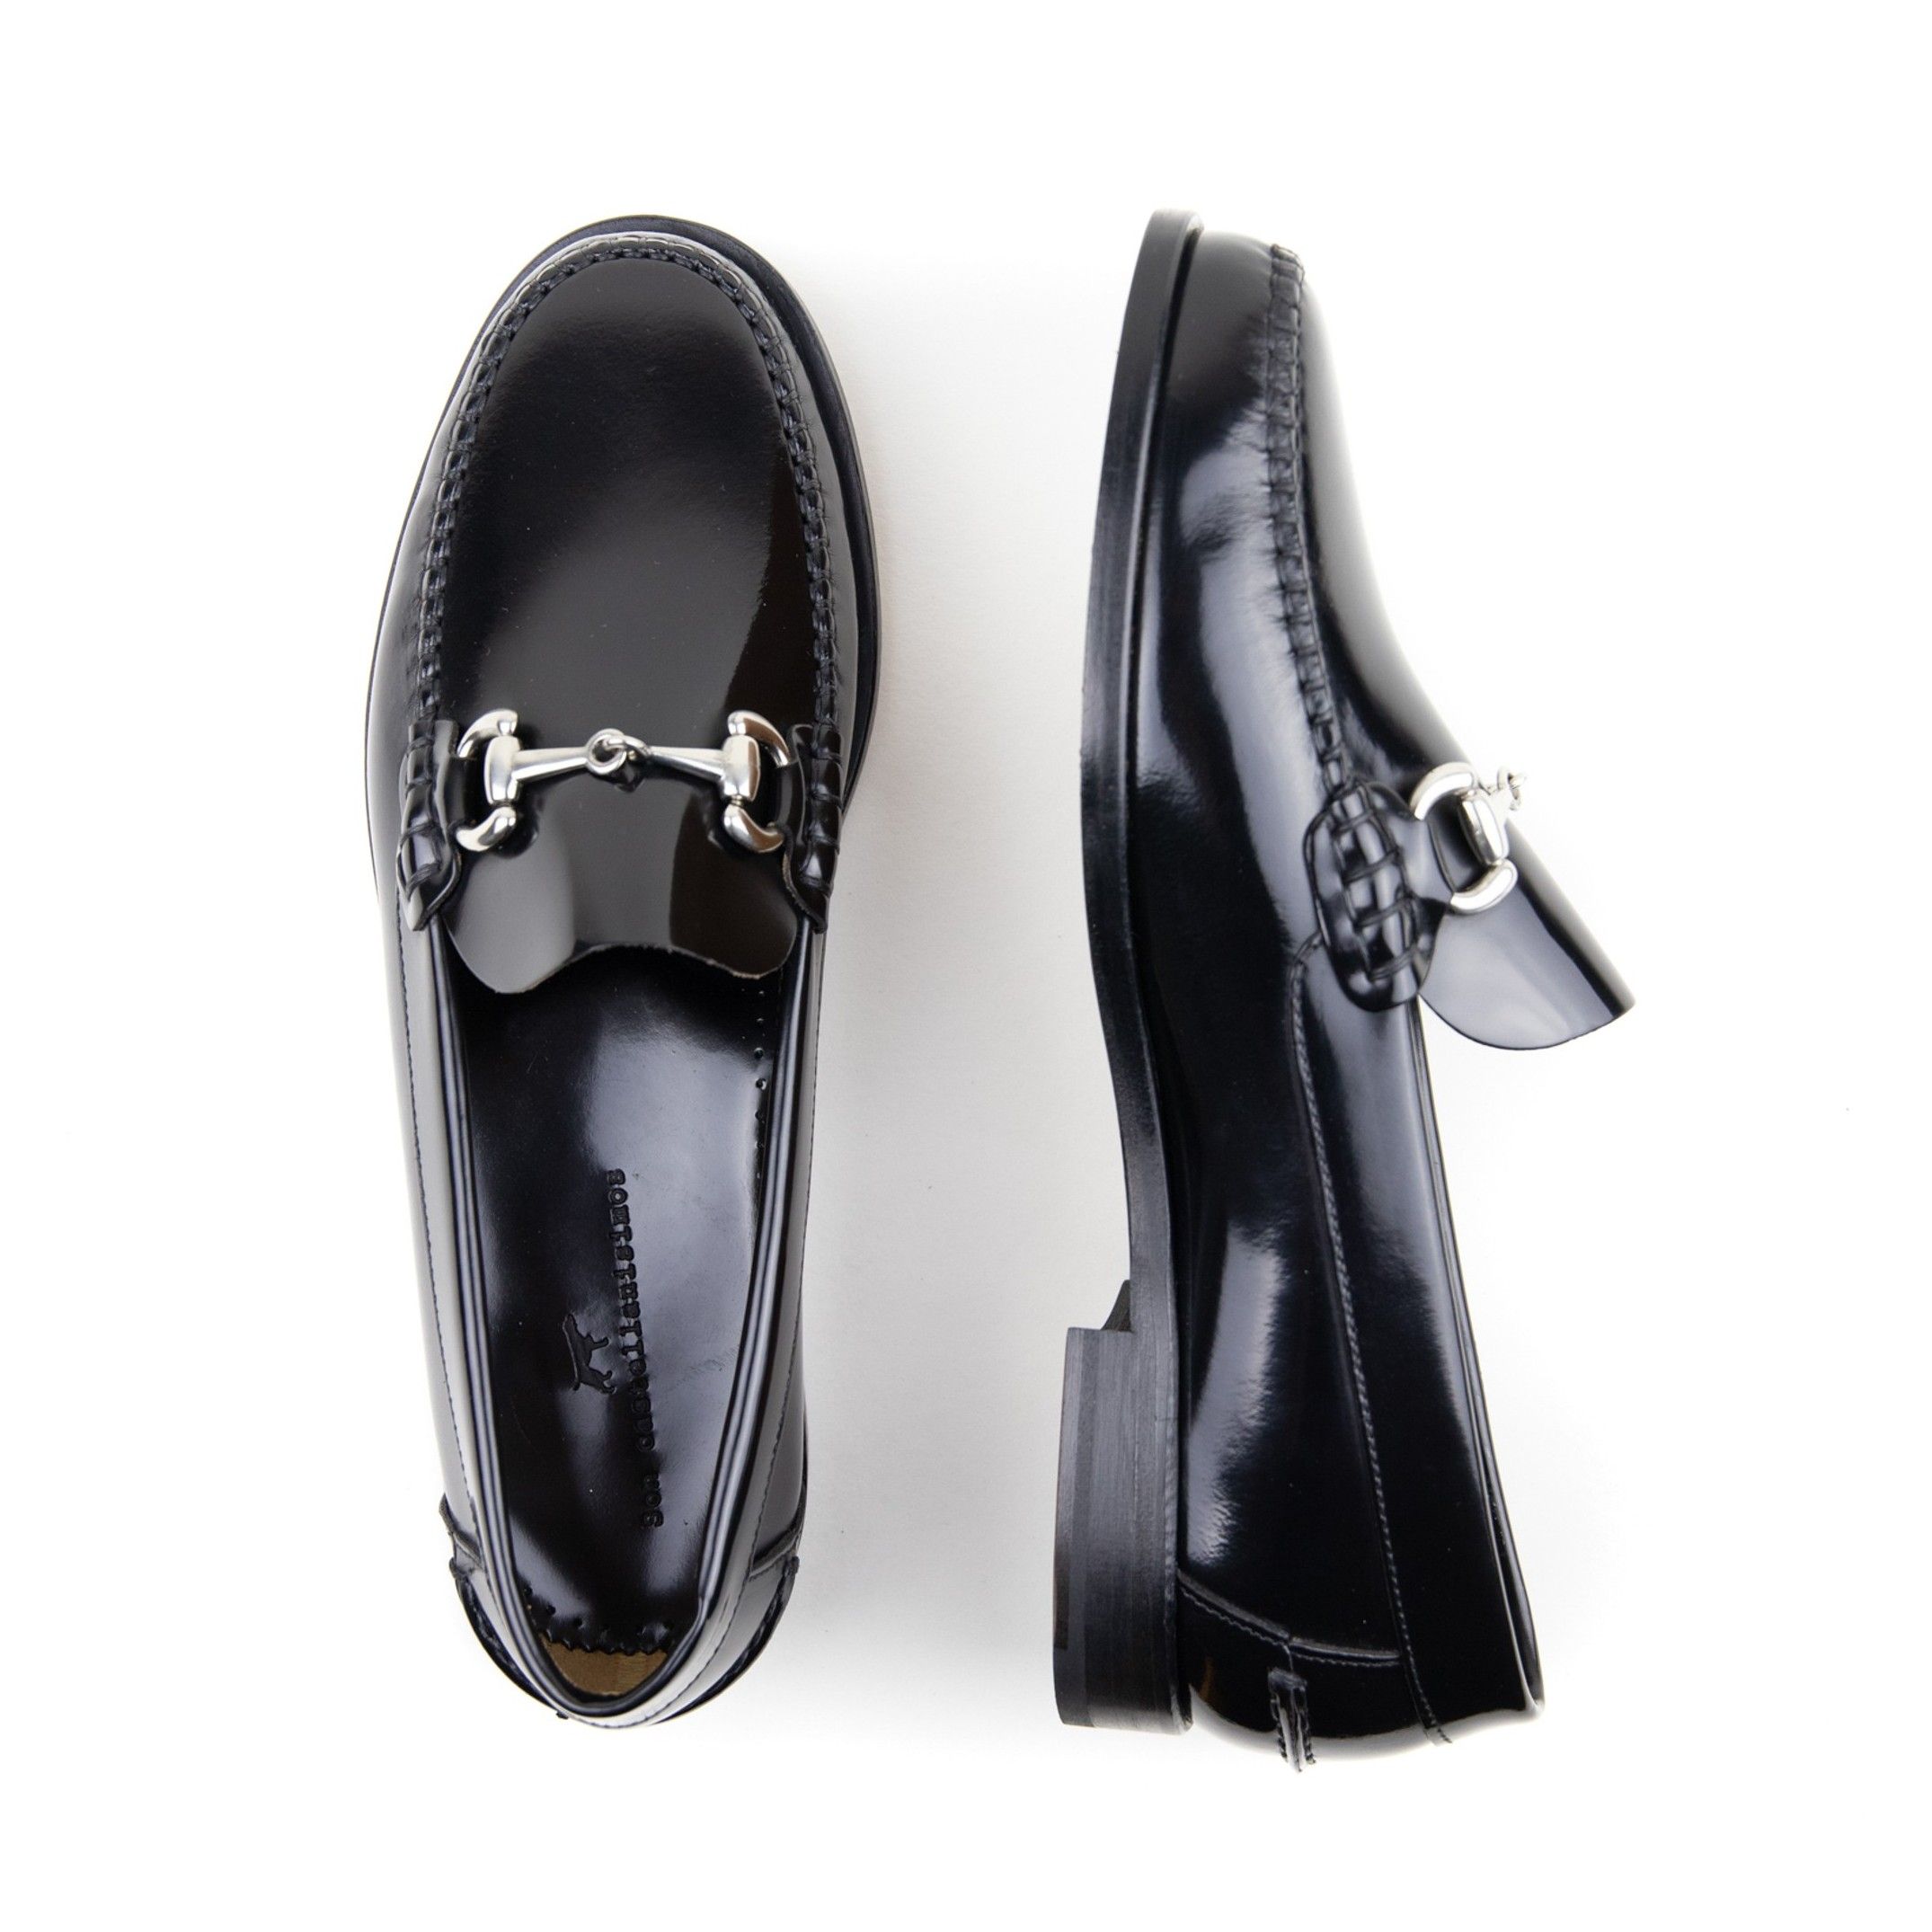 Florentic leather loafers with metal detail. Premium Collection of Son Castellanisimos. Outer material: Cowhide leather. Inner: Cowhide leather. Open shoe. Lining and insole: Cowhide leather. Leather sole. Height heel: 2 cm. Designed and manufacture in Spain.